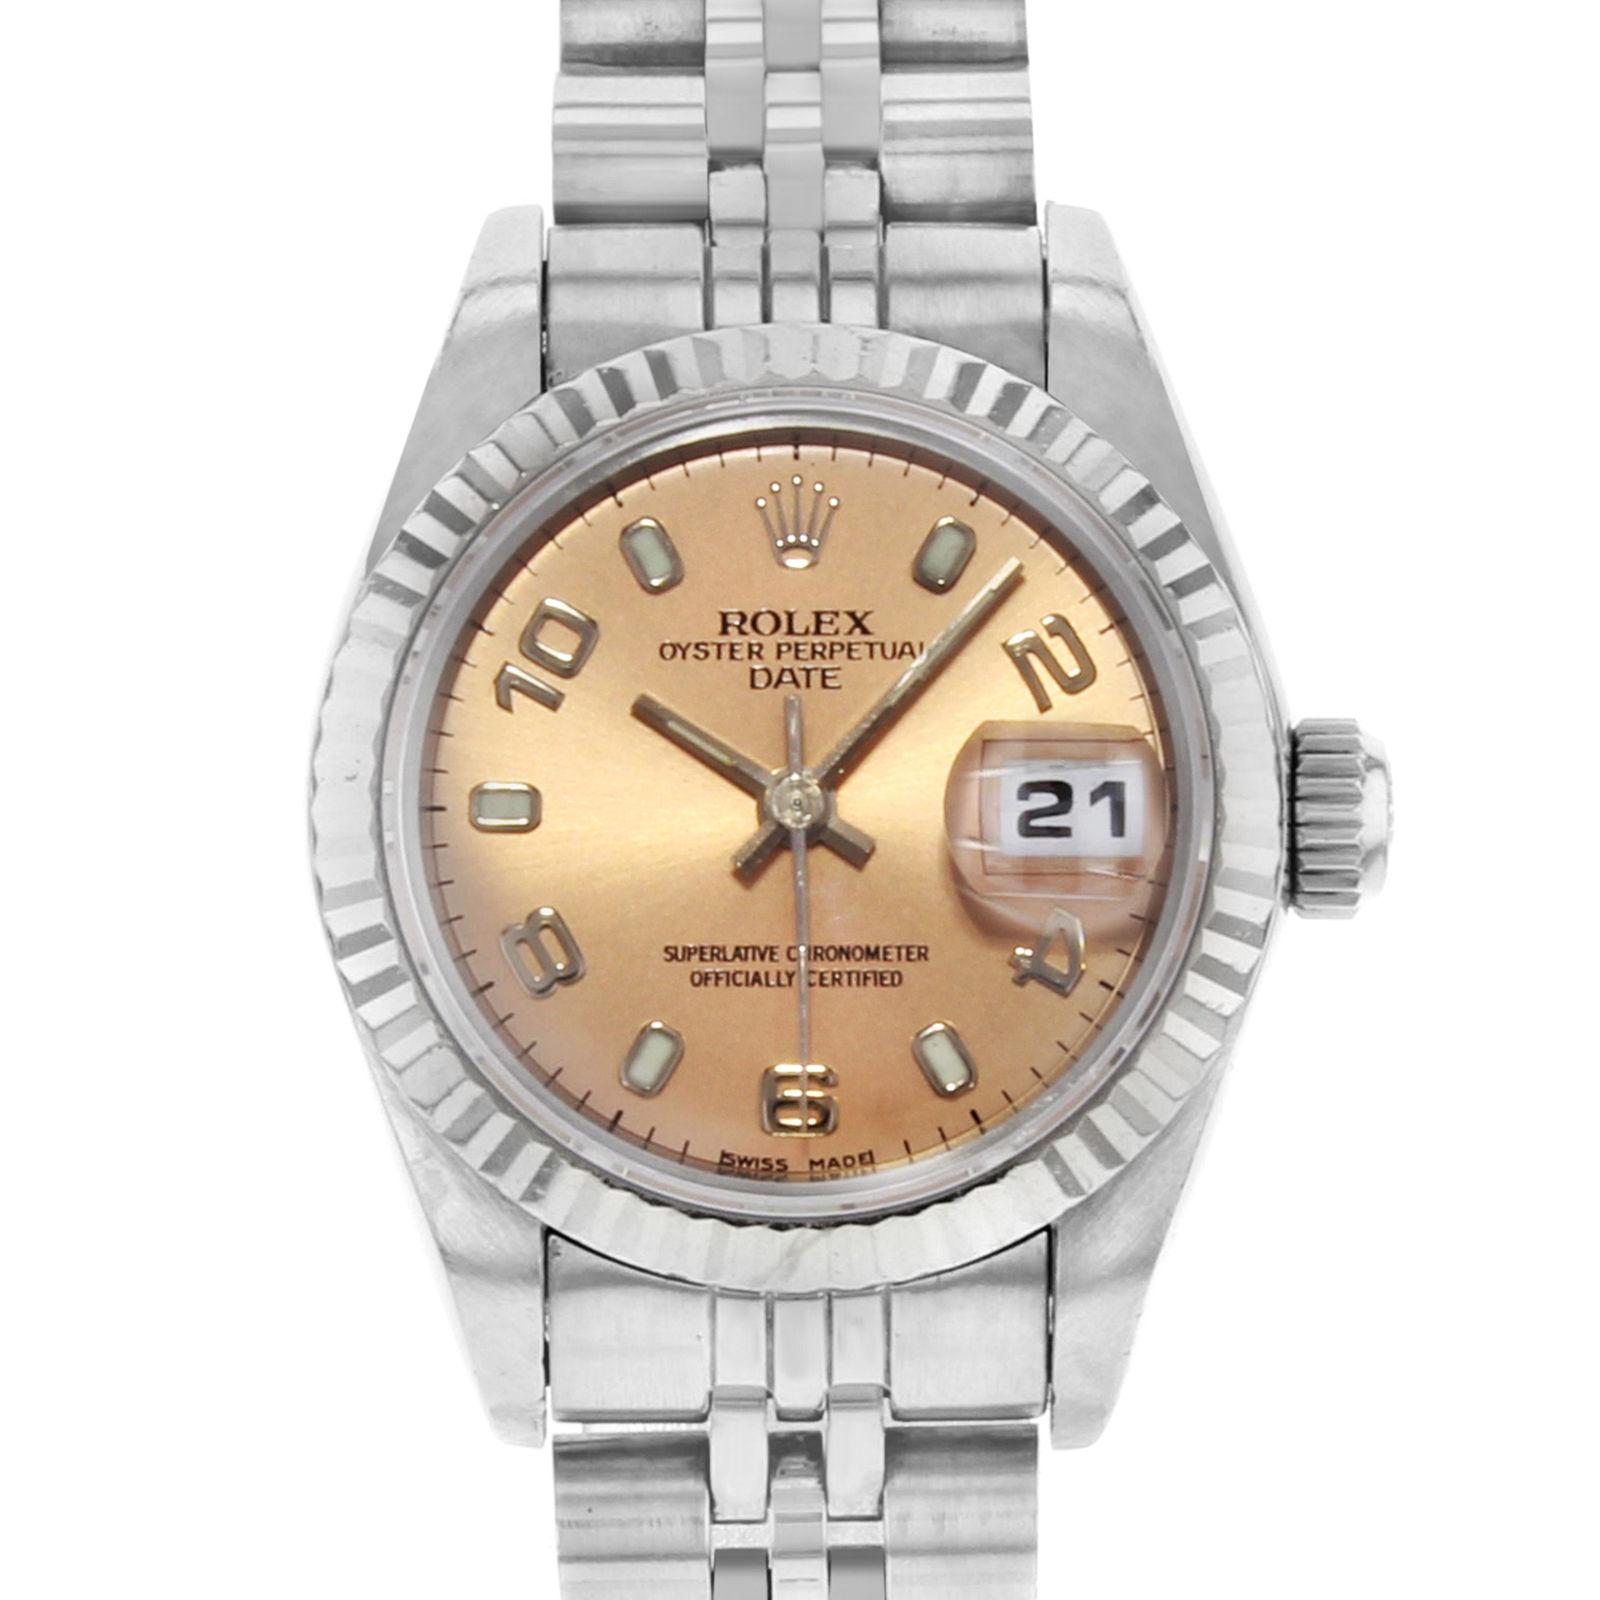 (20003)
This pre-owned Rolex Date 69174 is a beautiful Ladies timepiece that is powered by automatic movement which is cased in a stainless steel case. It has a round shape face, date dial and has hand sticks & numerals style markers. It is